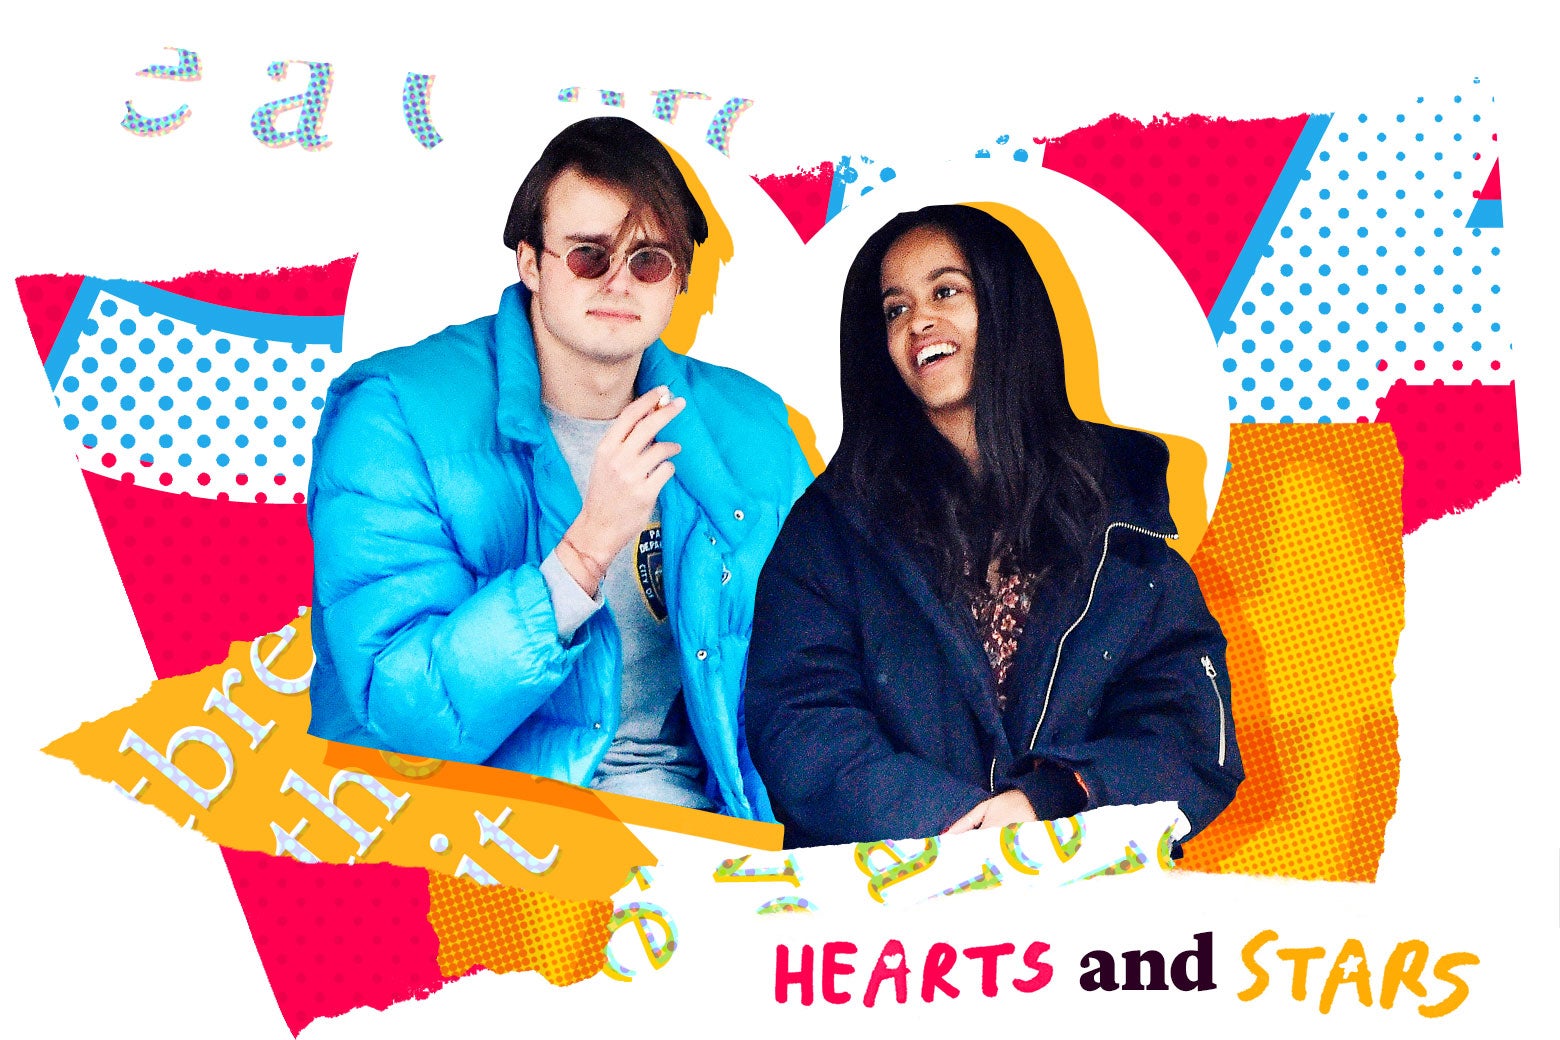 Colorful magazine clipping collage with Rory Farquharson and Malia Obama.